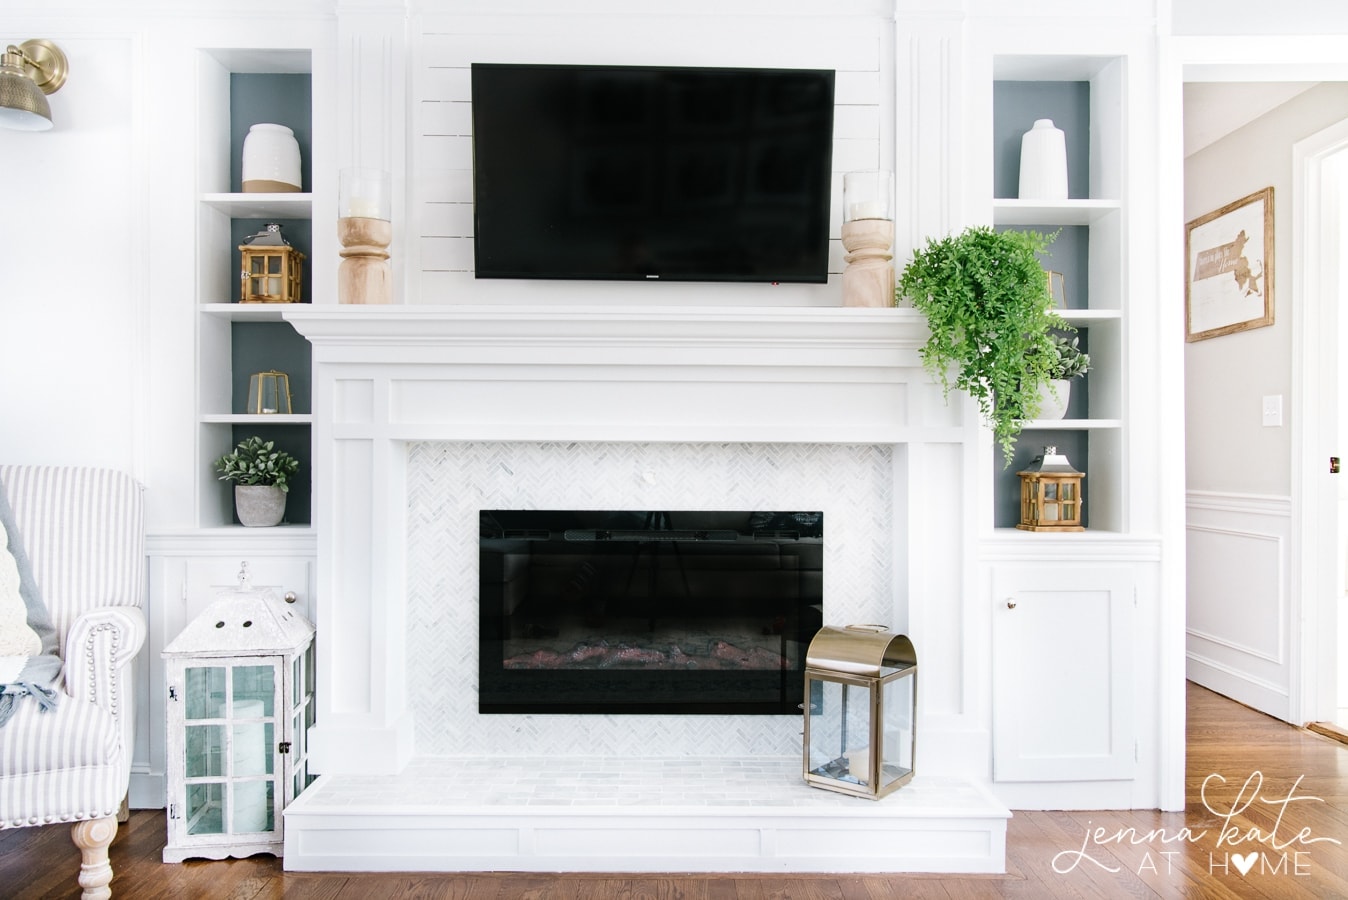 A fireplace with white mantle, wall-mounted television and built-in shelves on either side